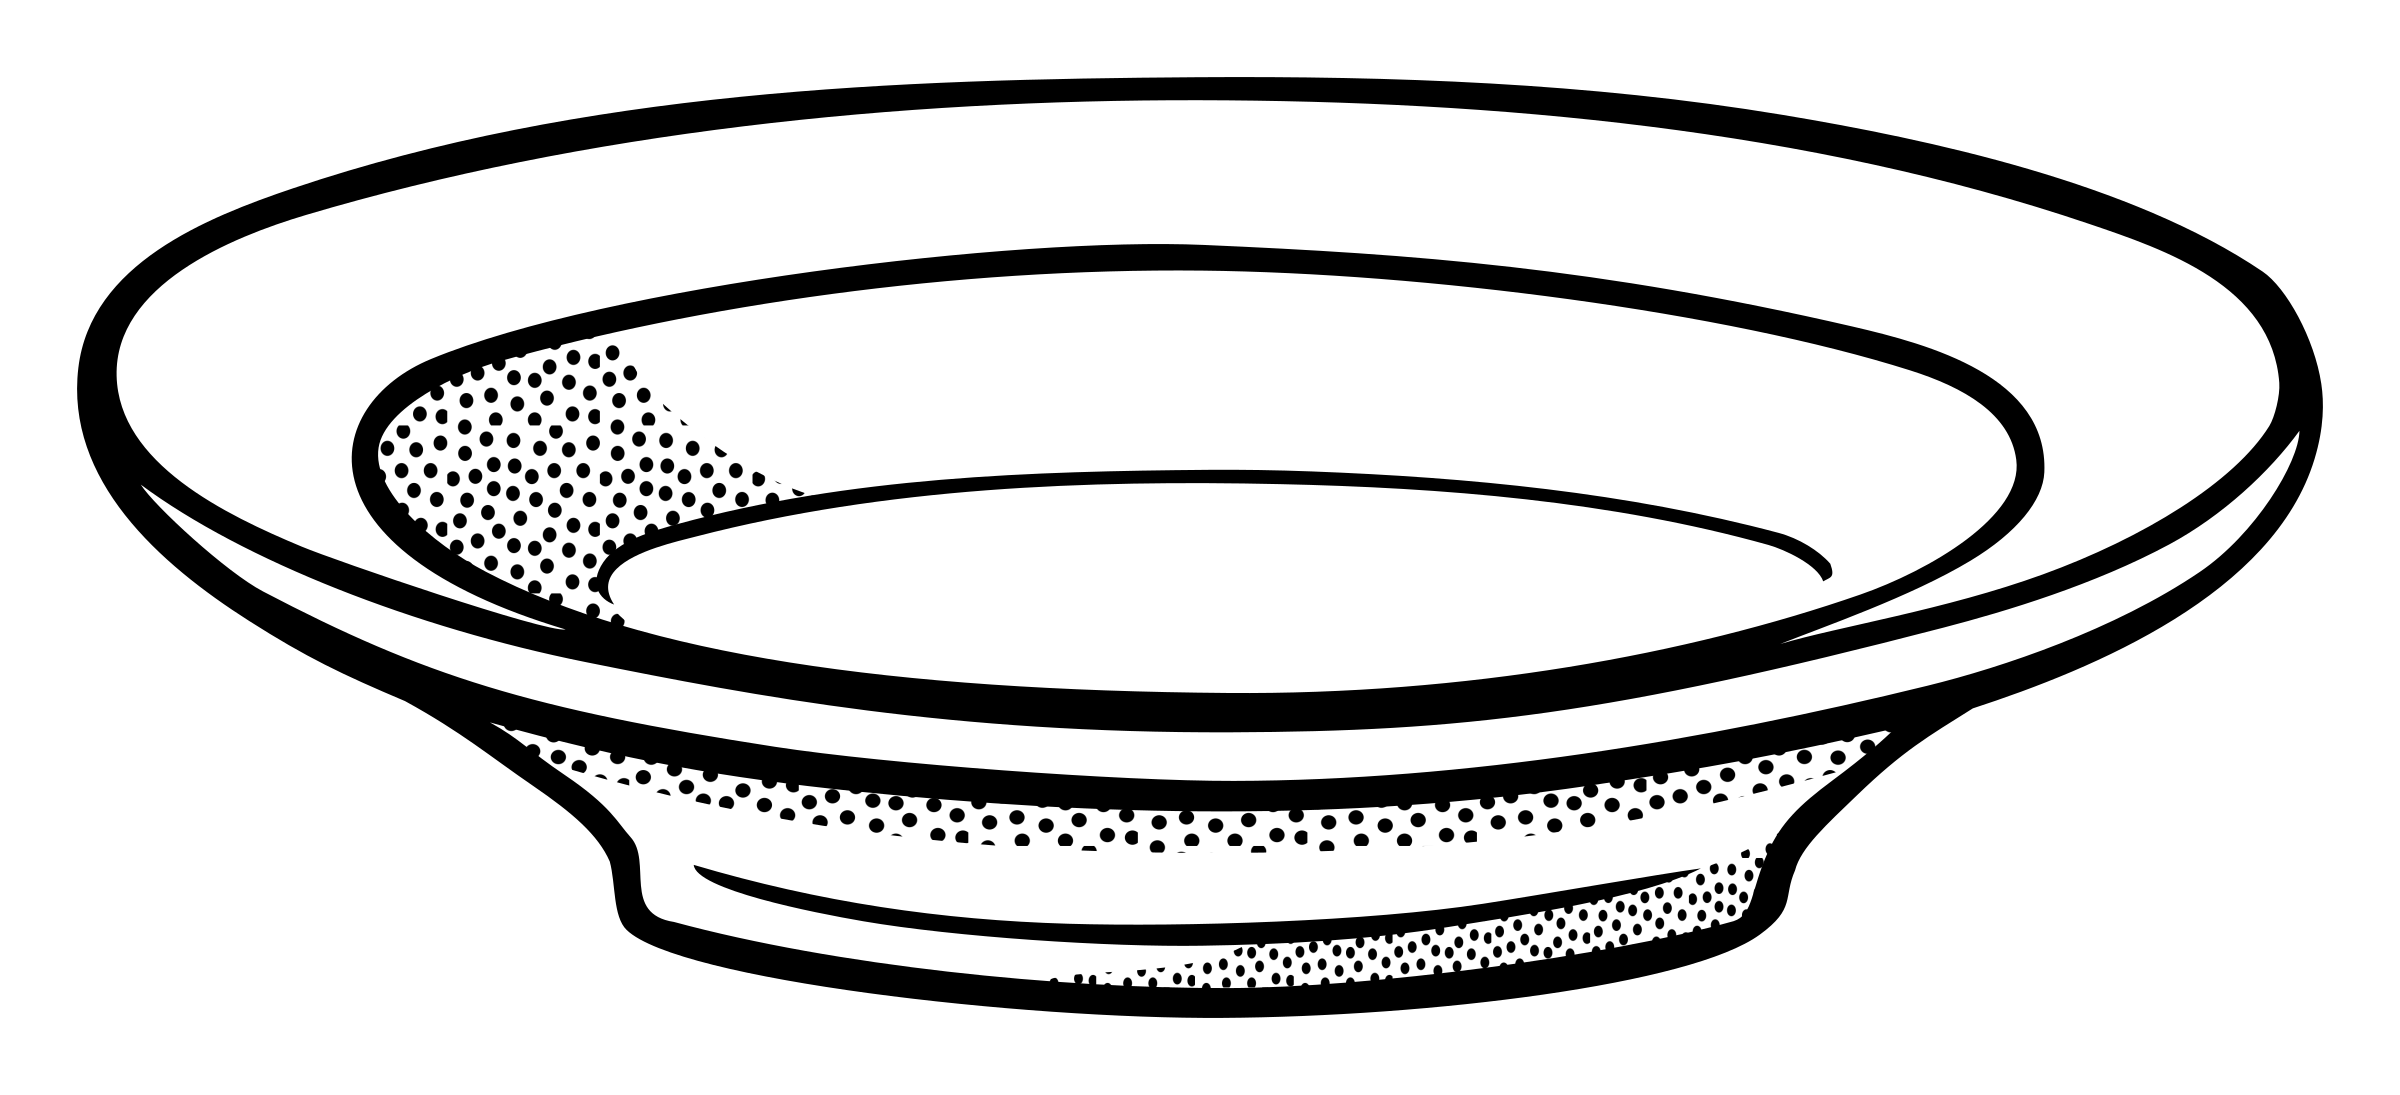 Dish clipart plate outline. Lineart big image png